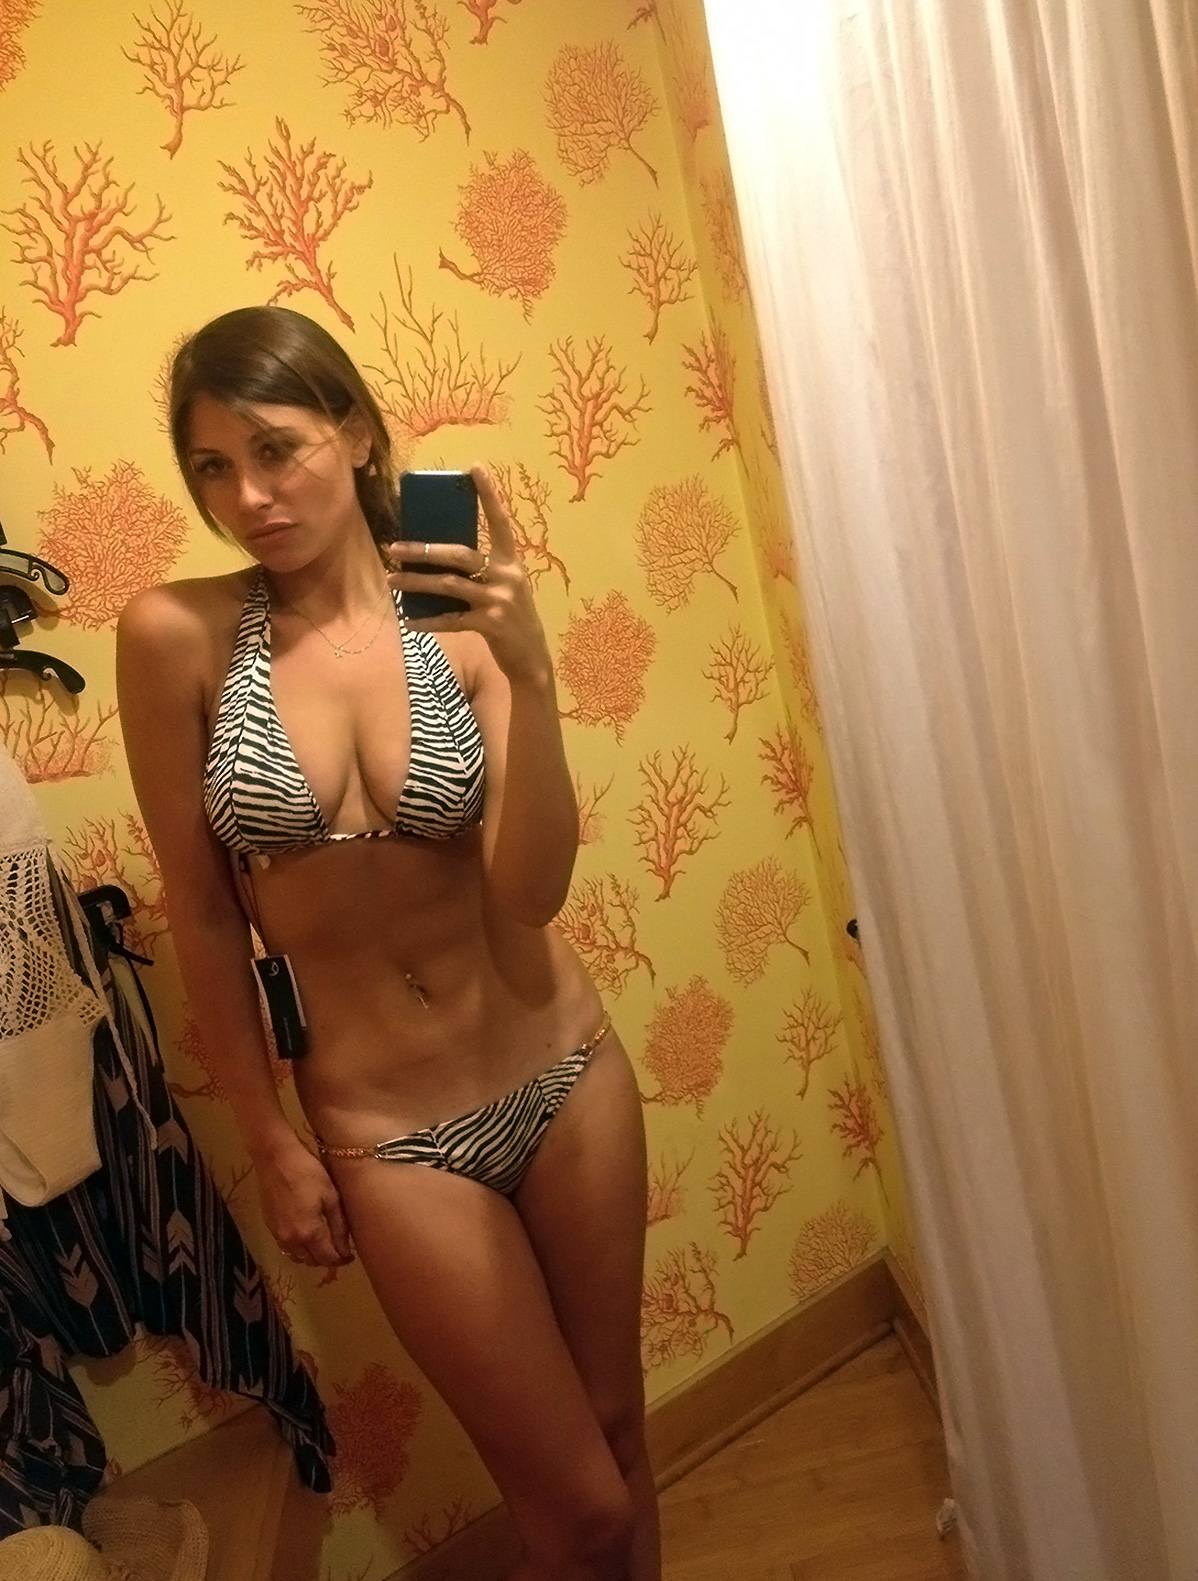 Aly Michalka nude hot leaked 13